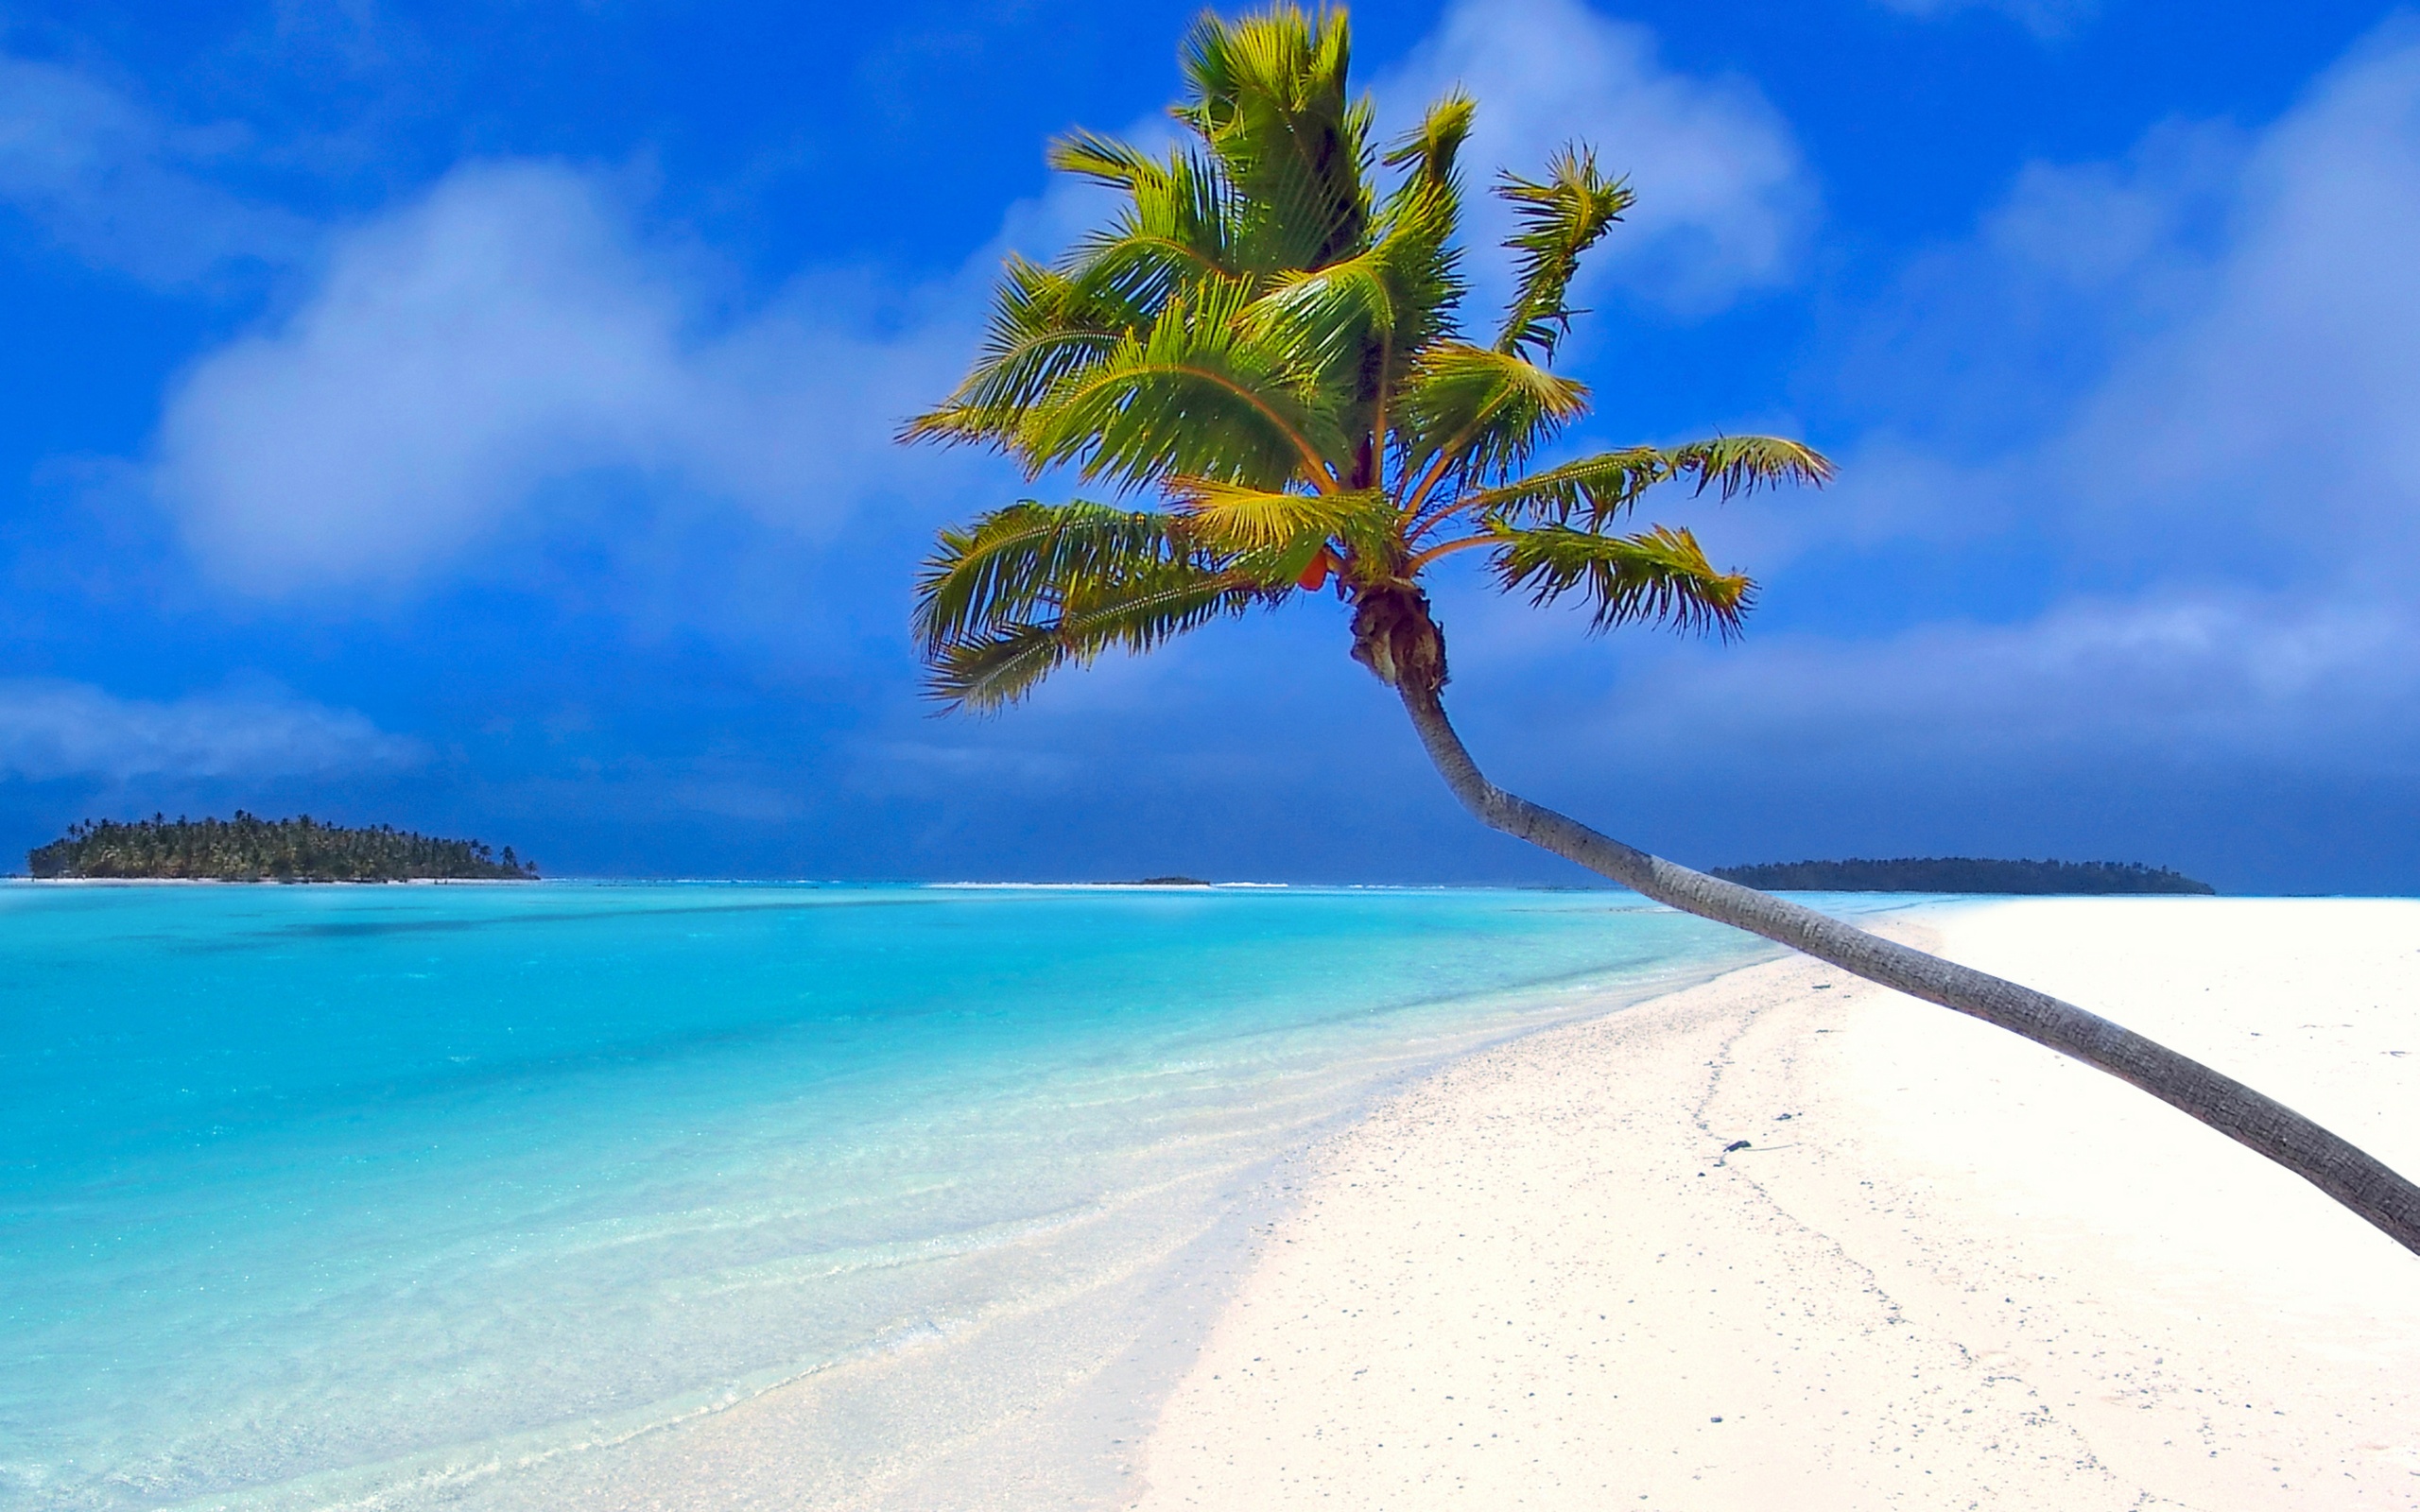 2560x1600 Isolated palm tree desktop PC and Mac wallpaper